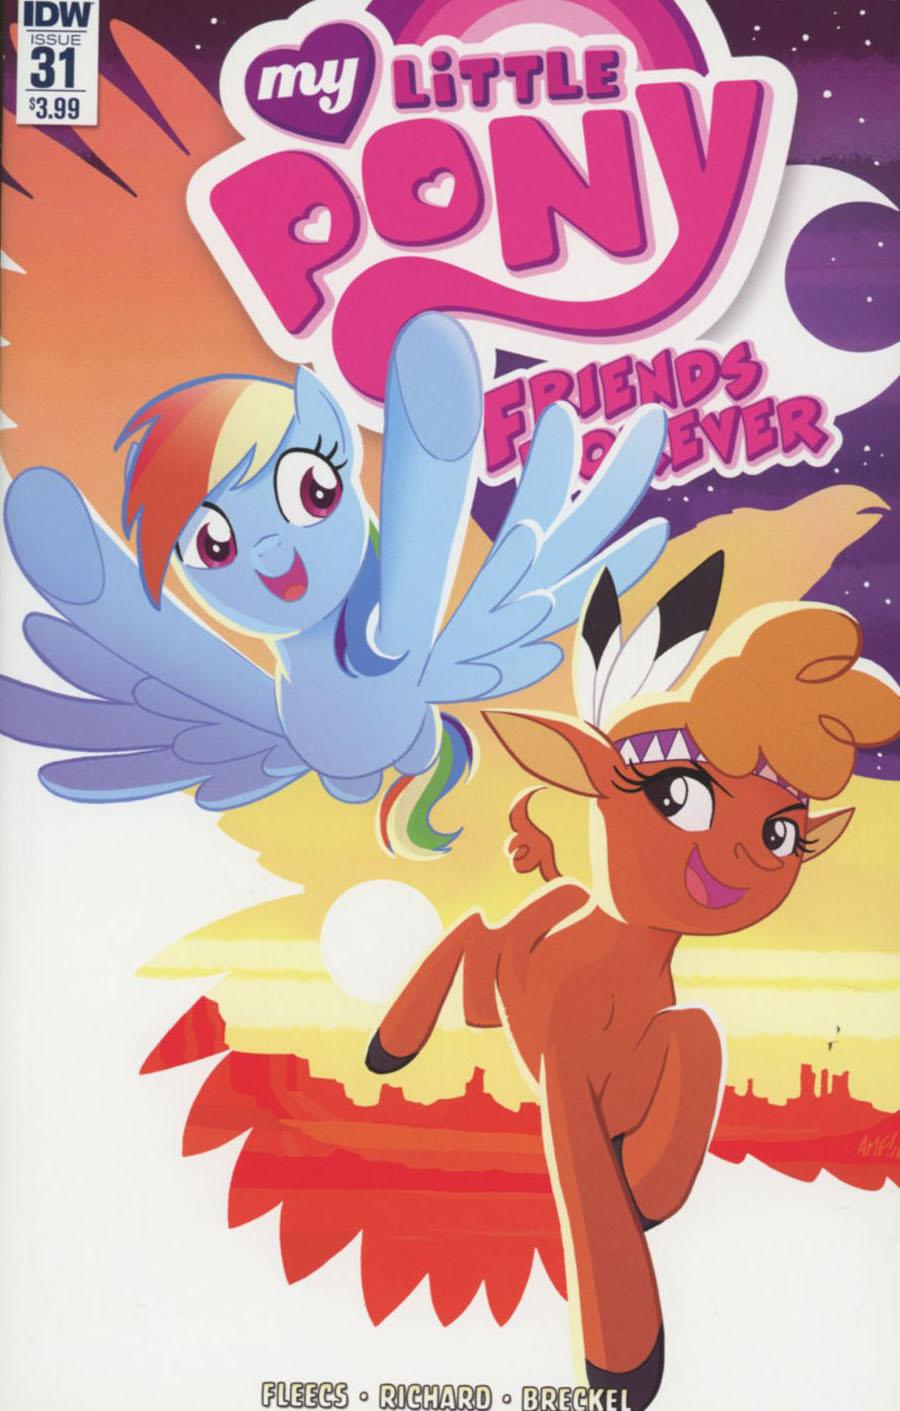 My Little Pony Friends Forever Vol. 1 #31